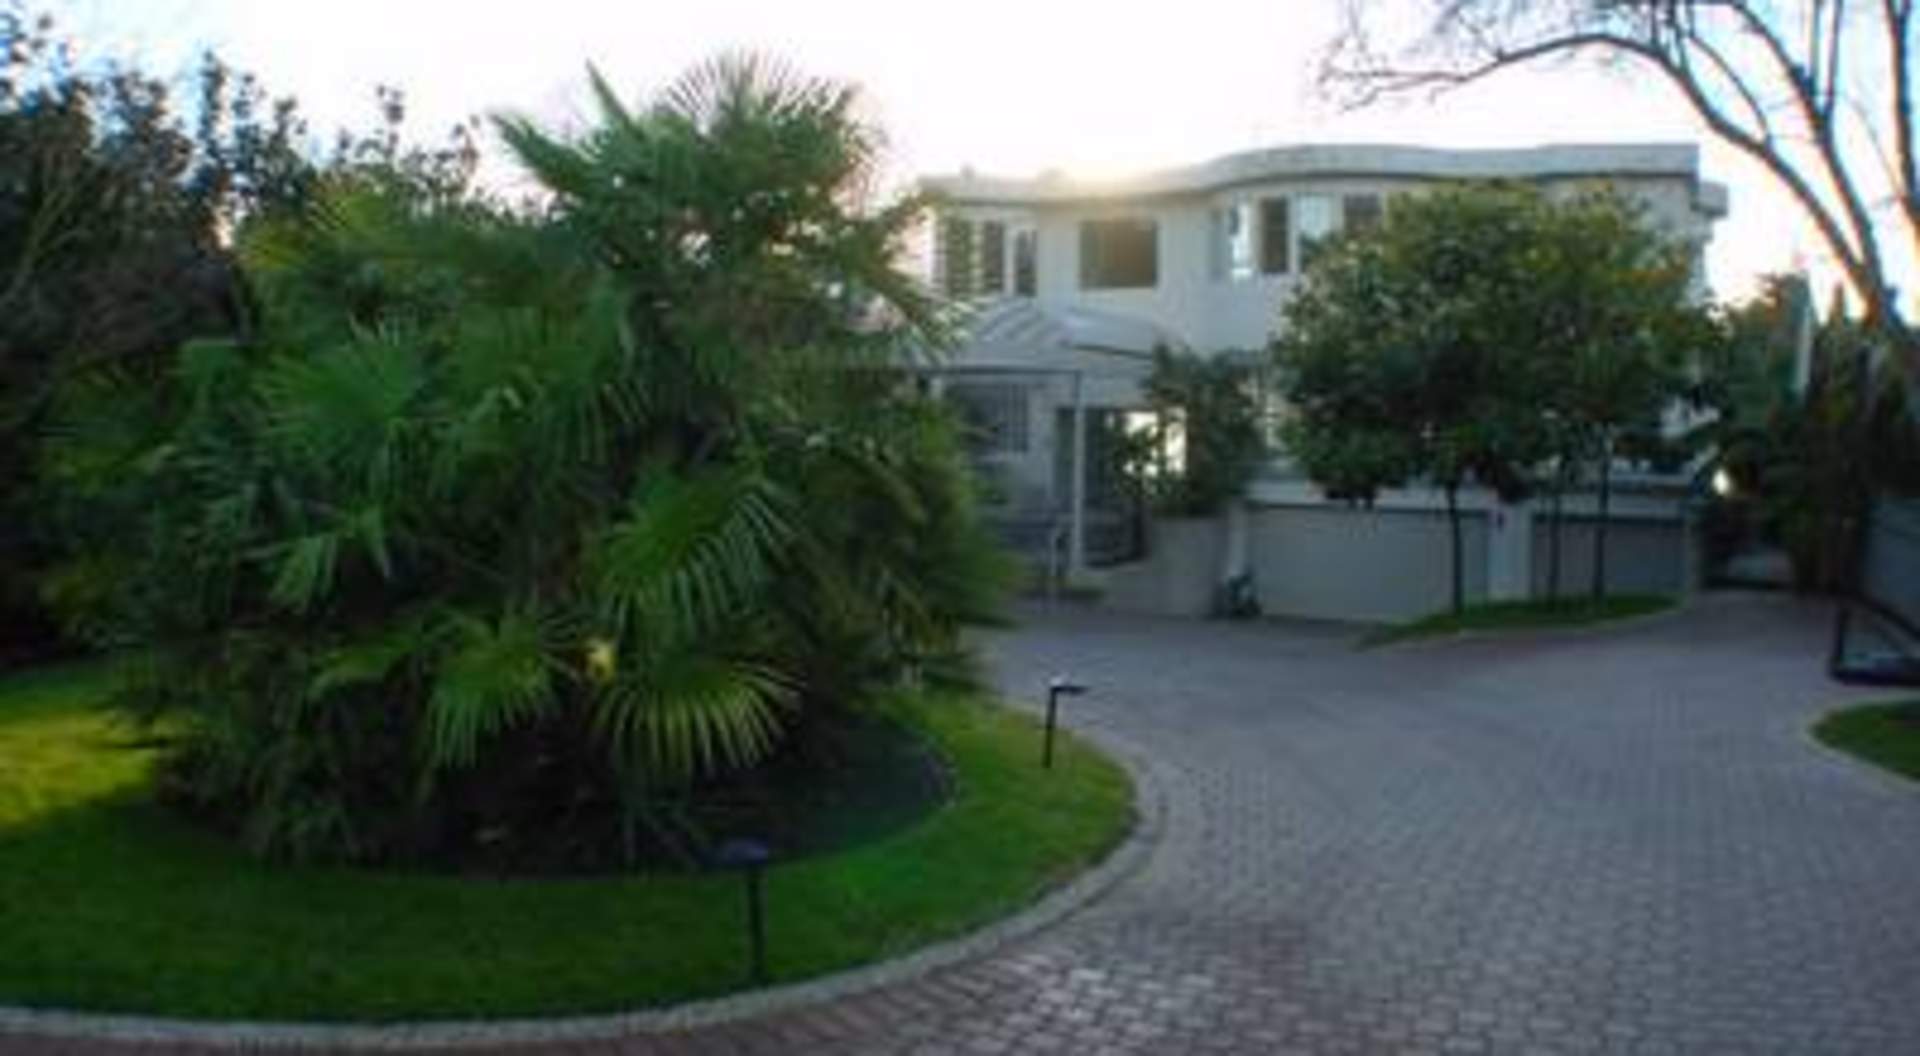 Mature Level Garden with Palm Trees